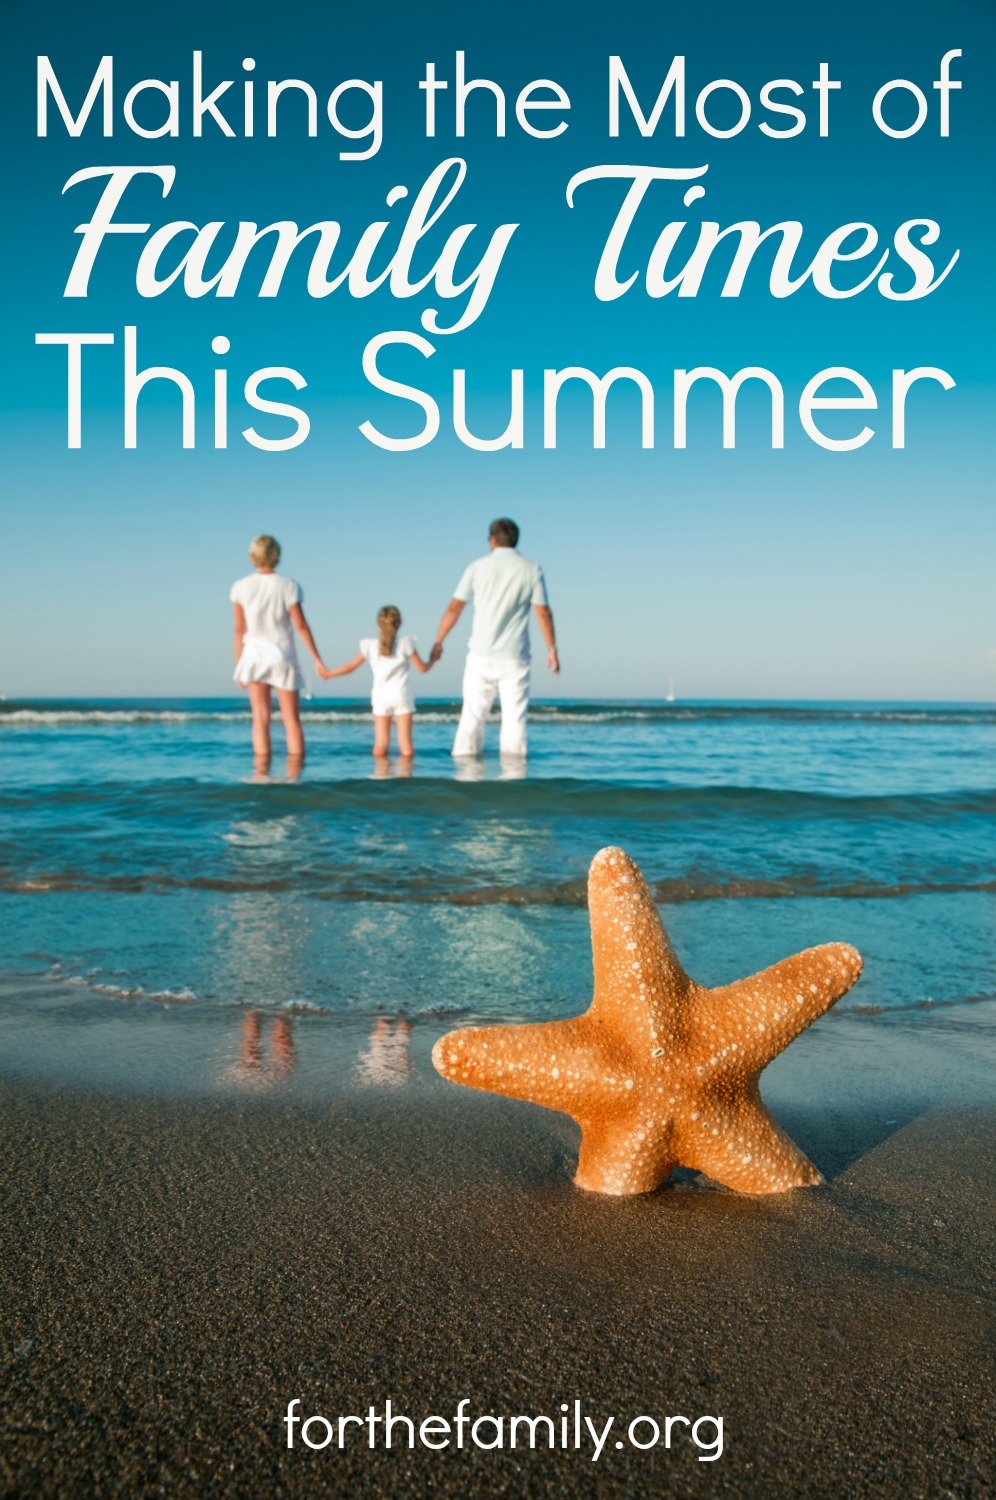 Making the Most of Family Times This Summer